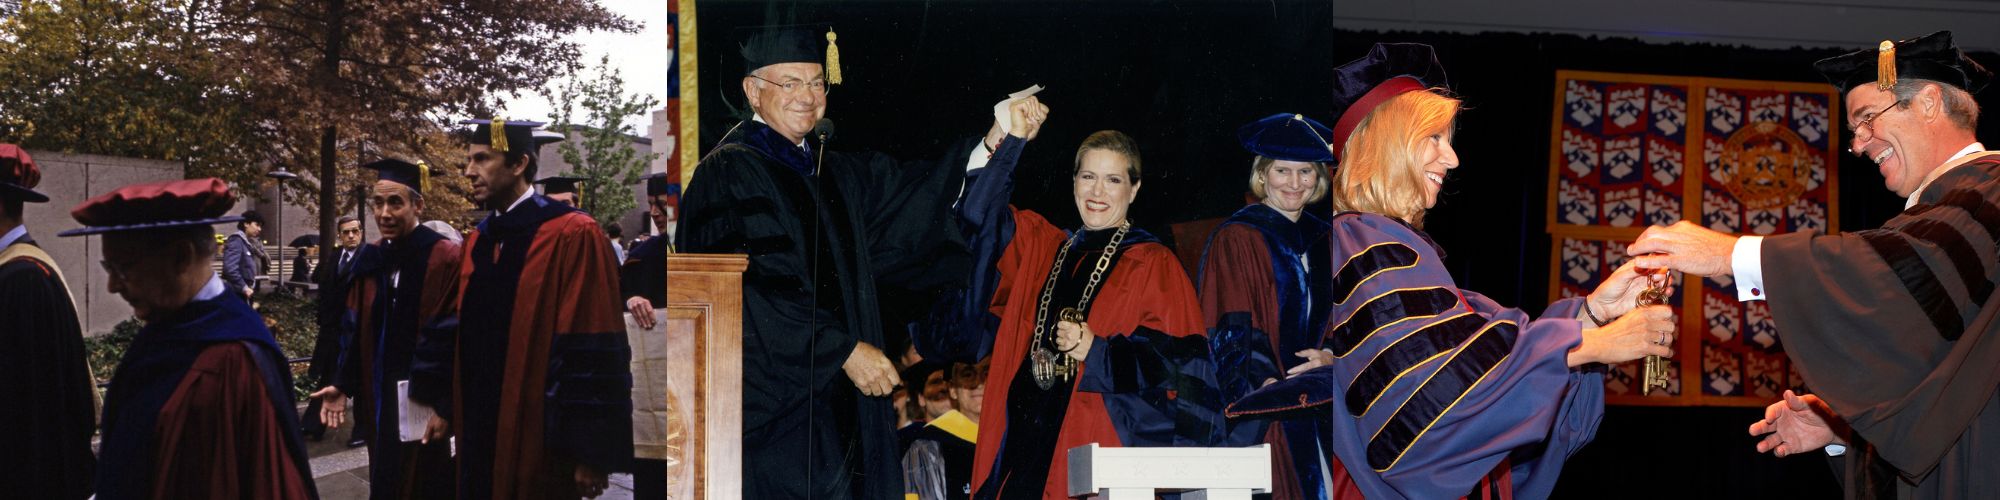 Left: Penn President Hackney inauguration; middle, Penn President Judith Rodin receiving the honorary keys; right, Amy Gutmann shaking hands at her inauguration.